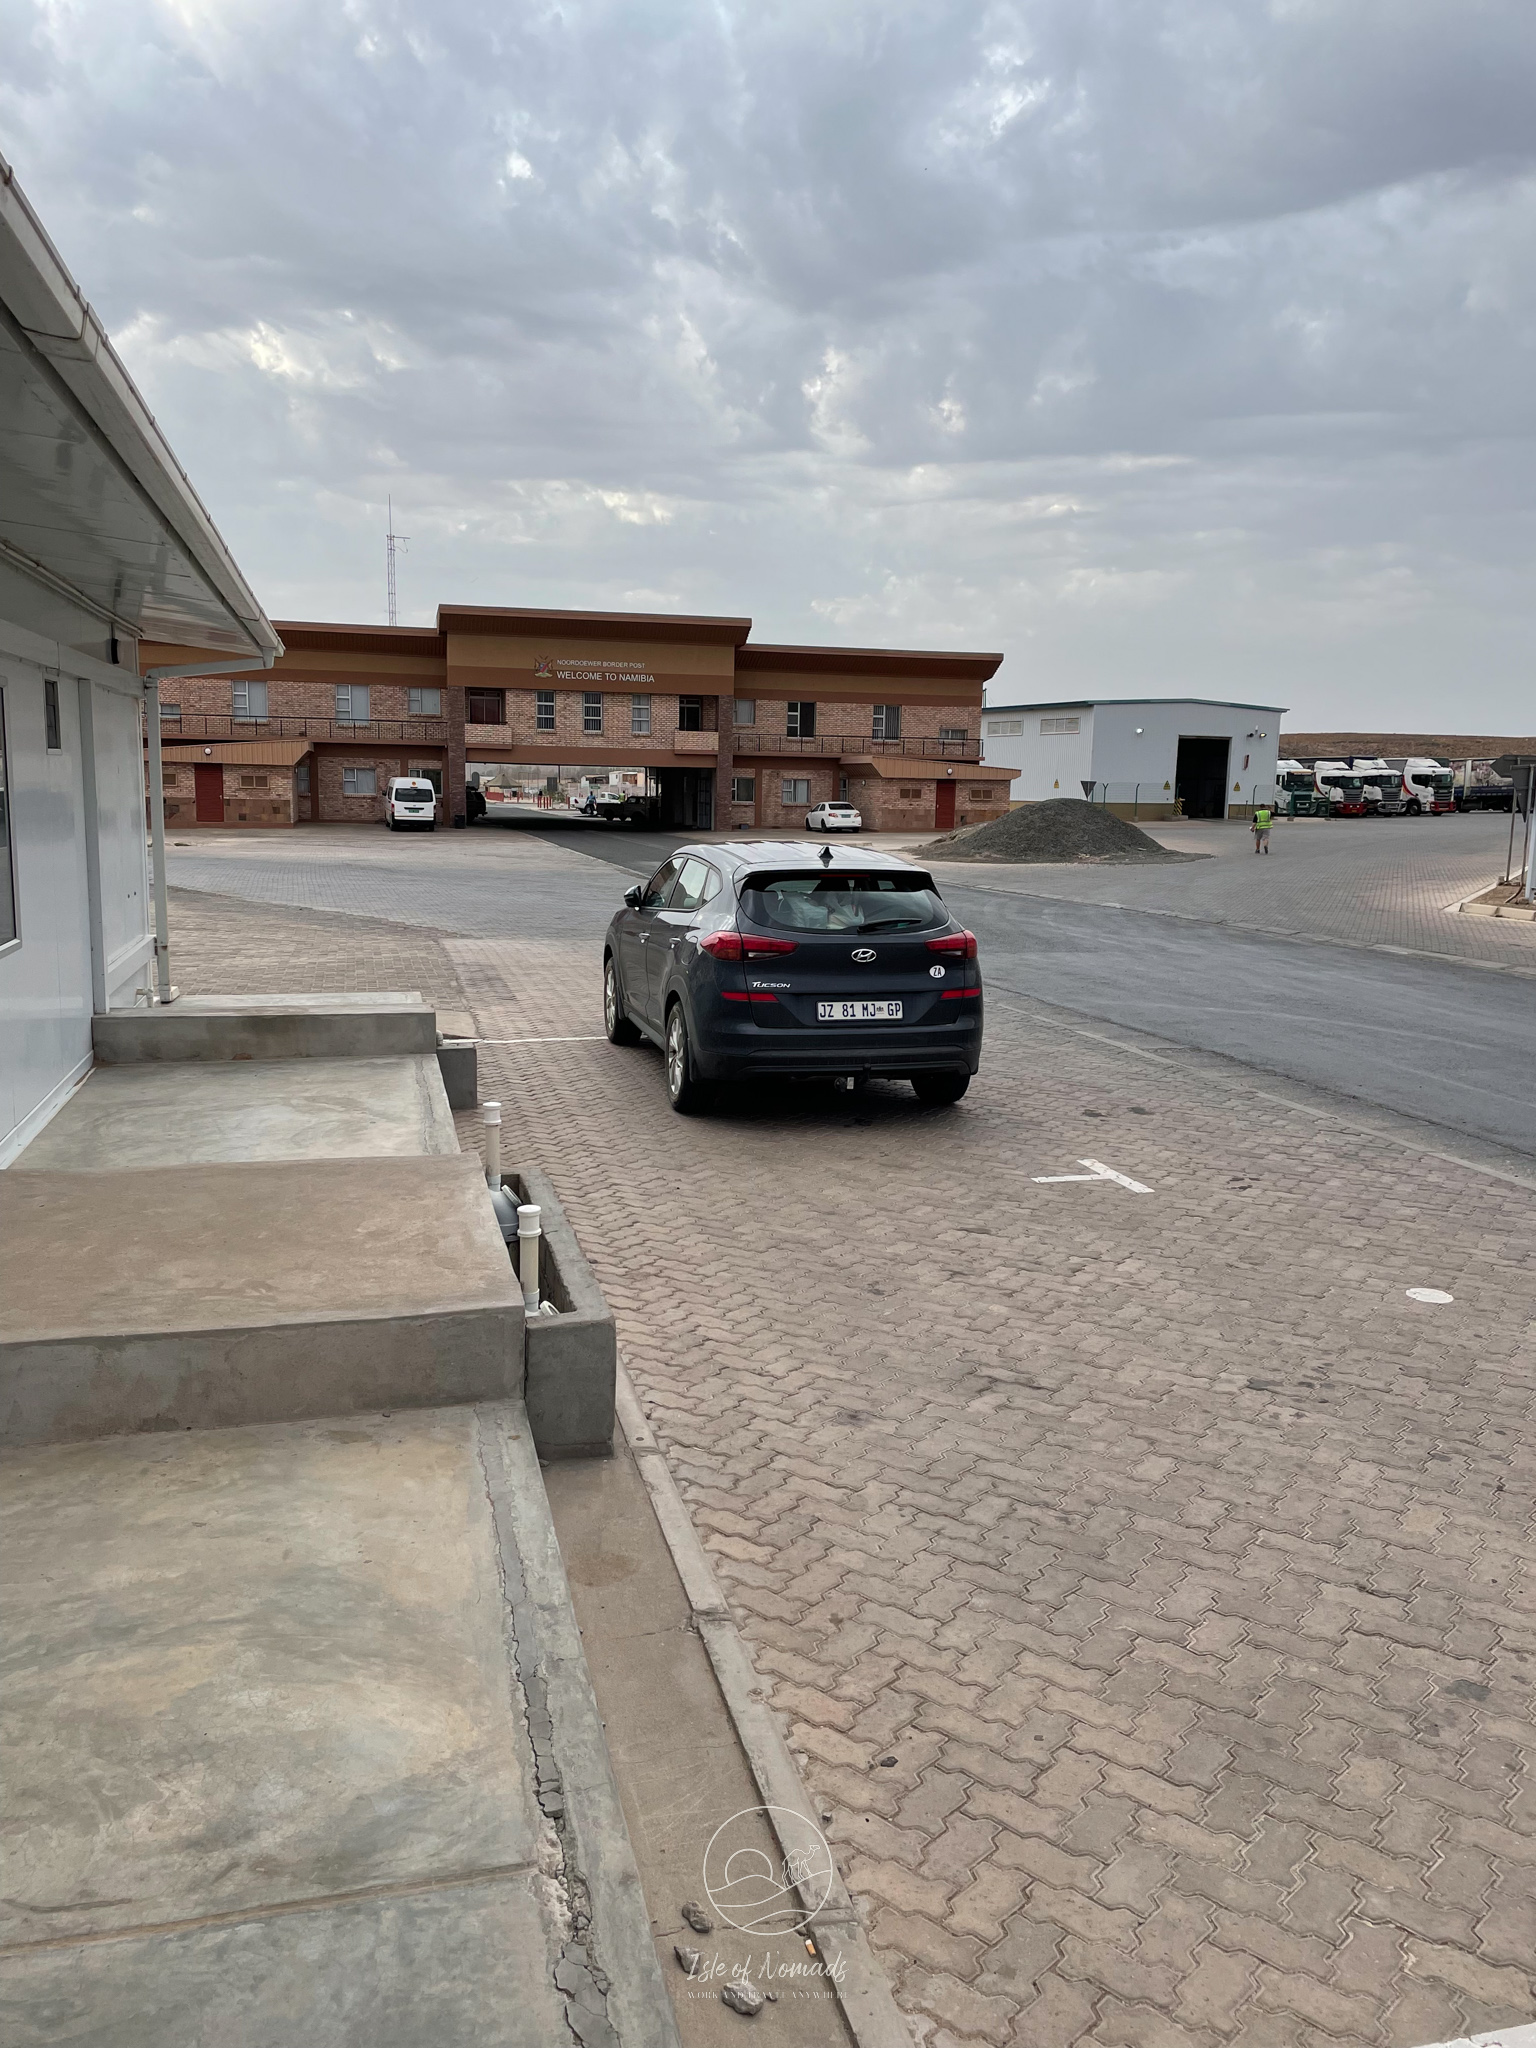 Our car at the border to Namibia